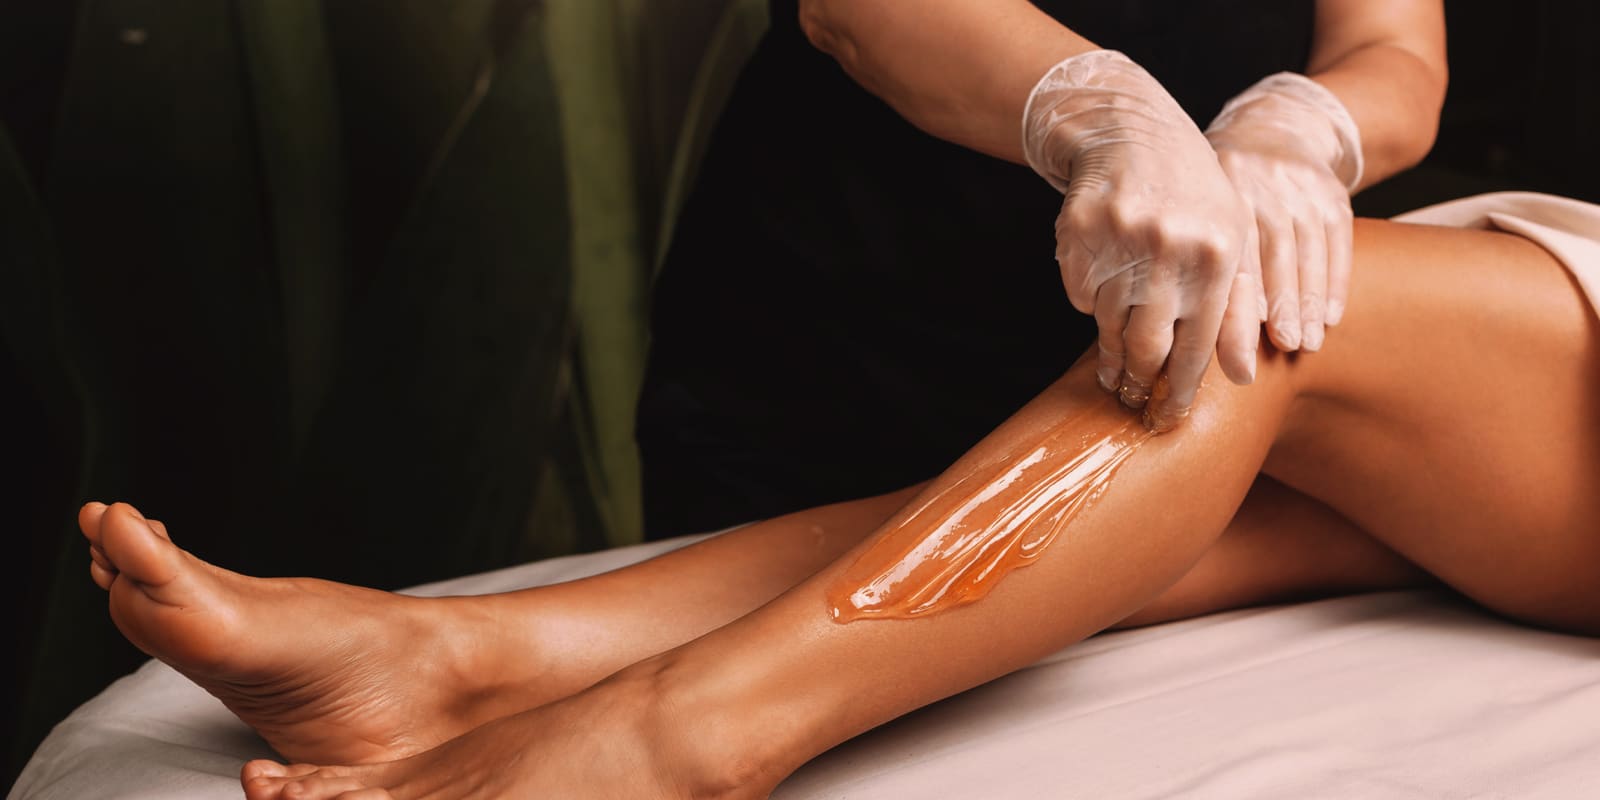 An image of a woman's leg with hot wax on it